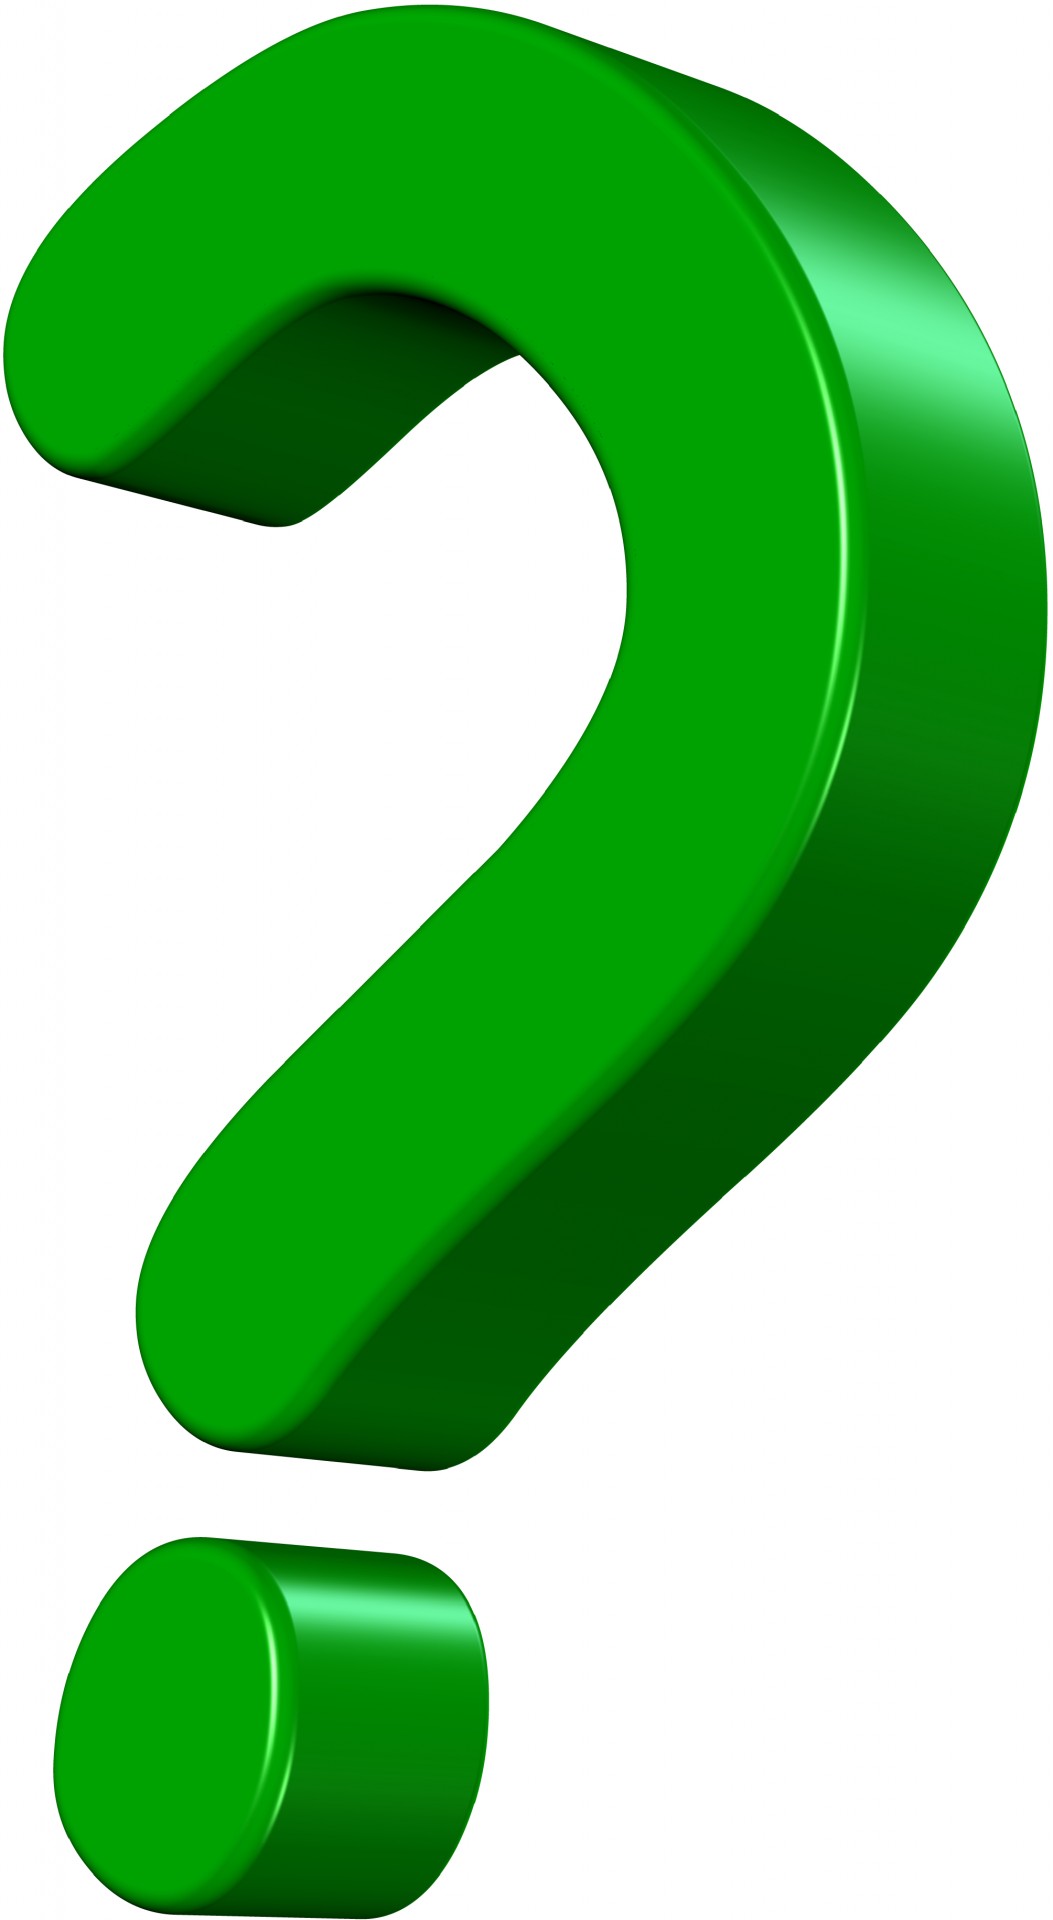 question mark green icon free photo